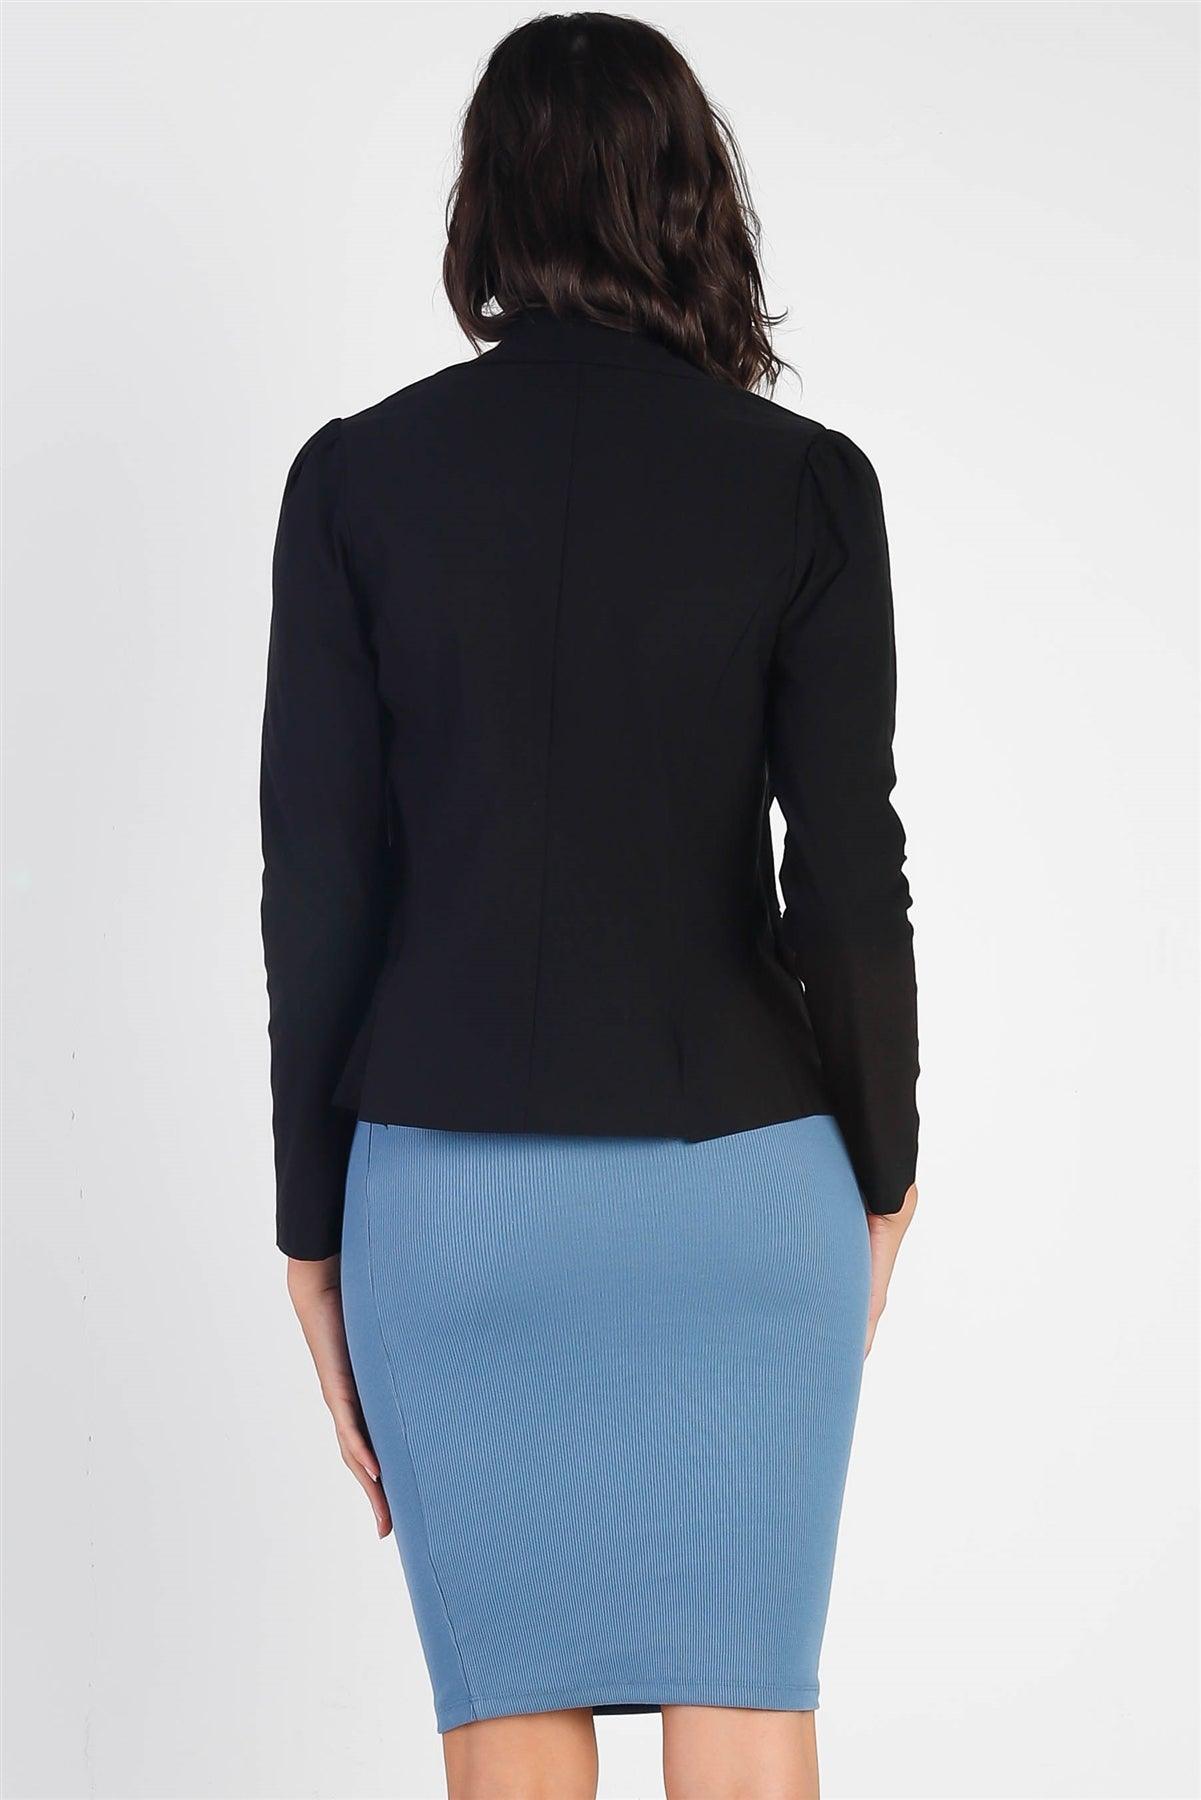 Strict Black Lapeled Collar Fitted Single-Breasted Blazer